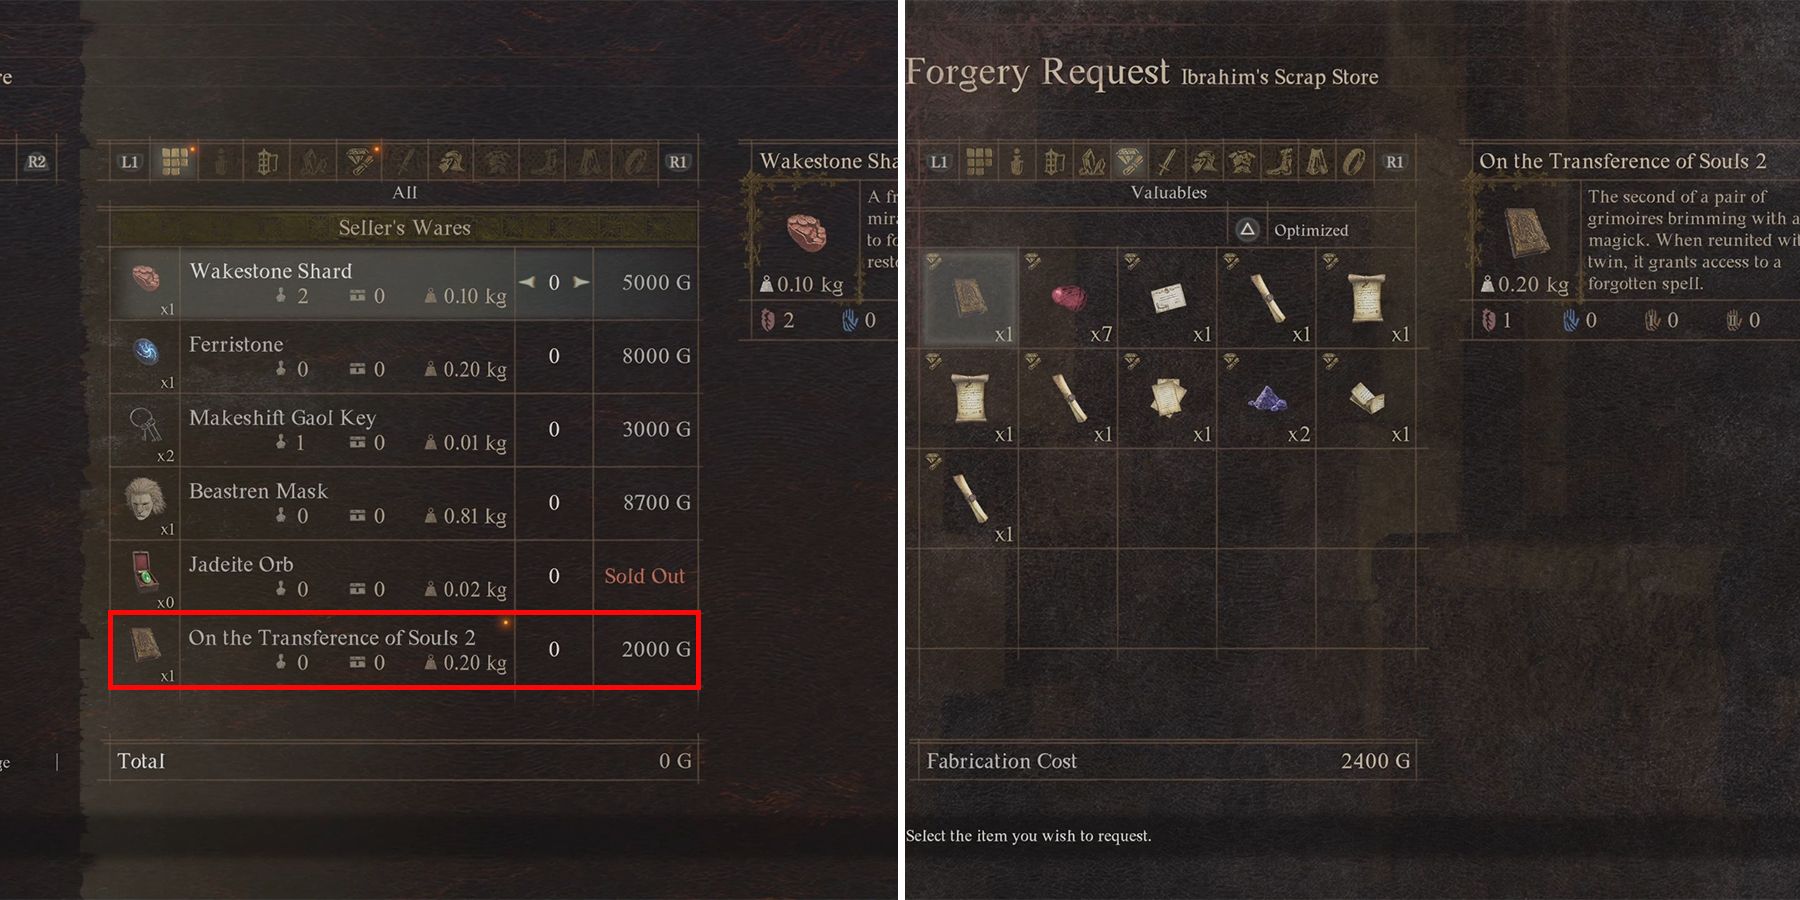 where to find on the transference of souls grimoire in dragons dogma 2